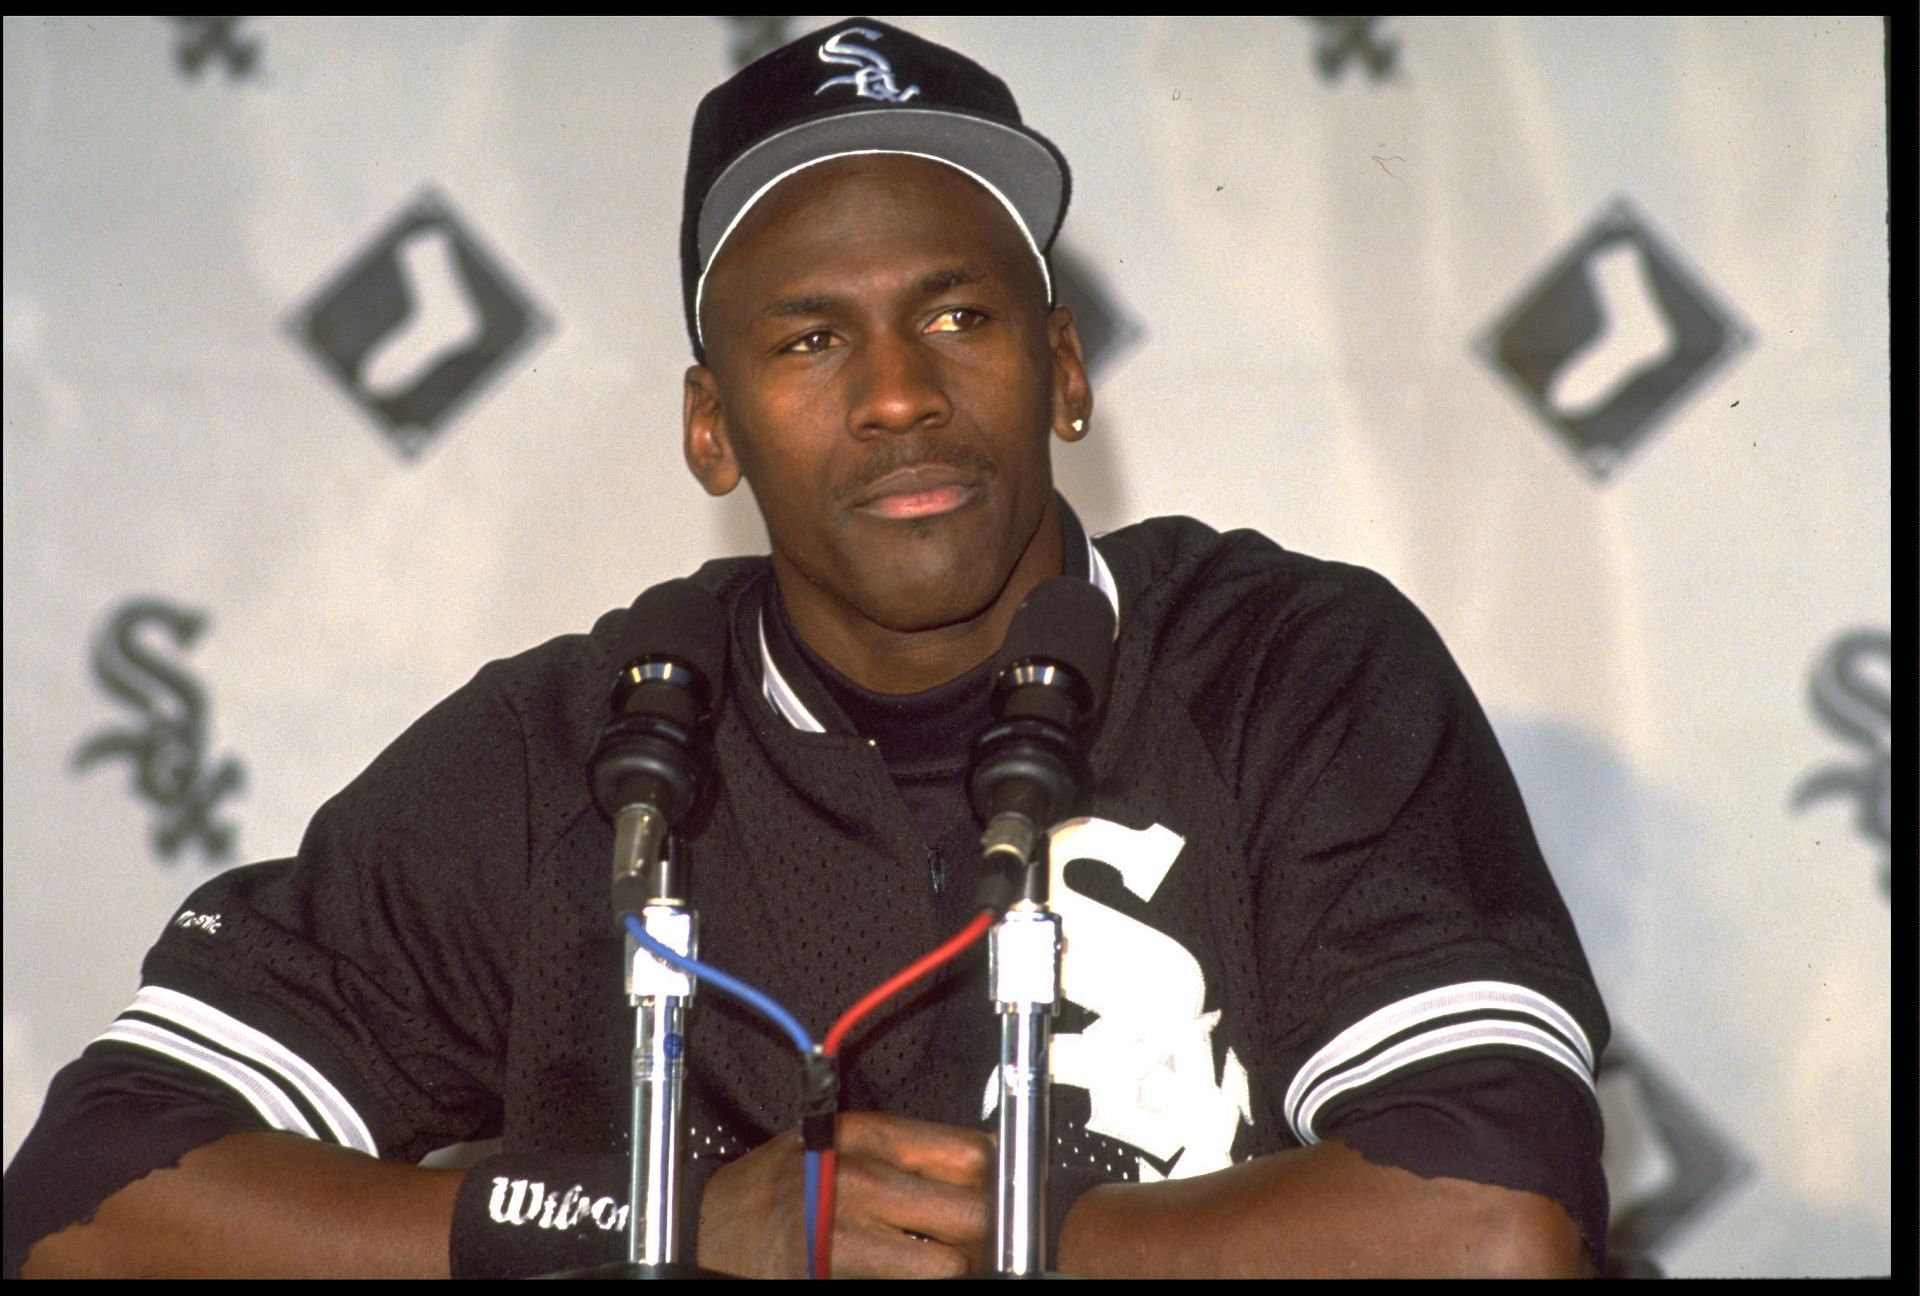 Michael Jordan with the Chicago White Sox organization